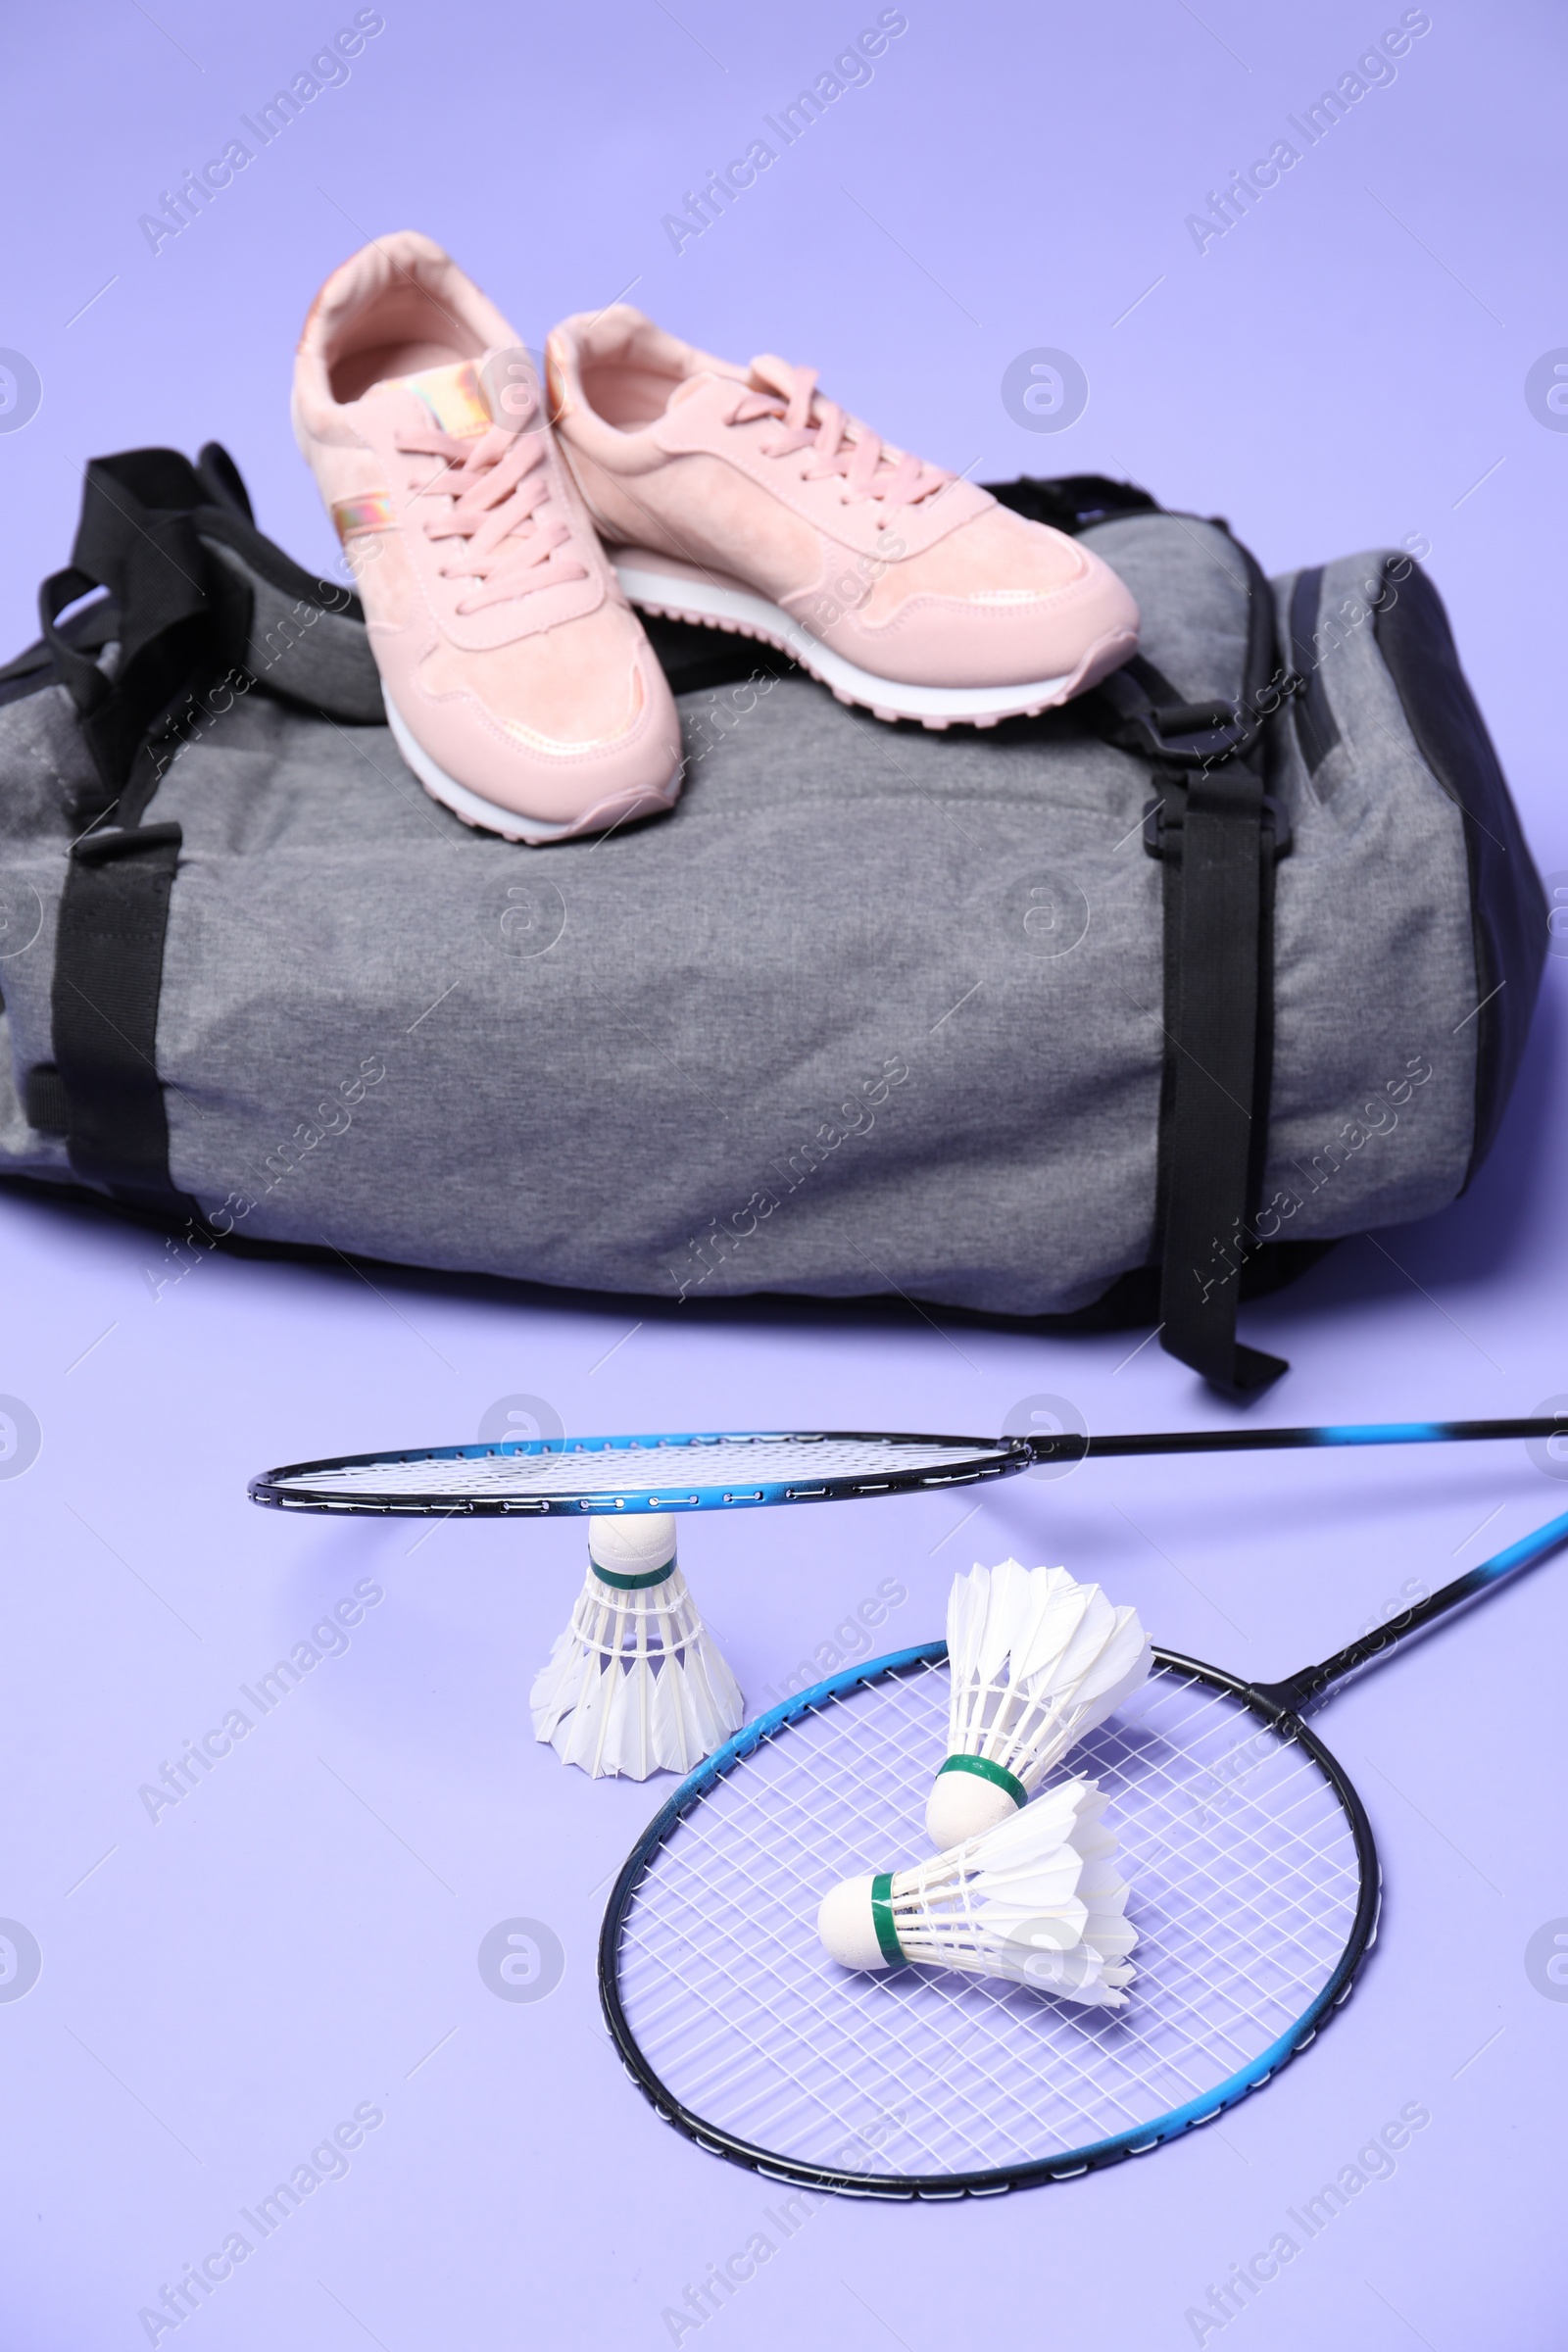 Photo of Feather badminton shuttlecocks, rackets, bag and sneakers on violet background